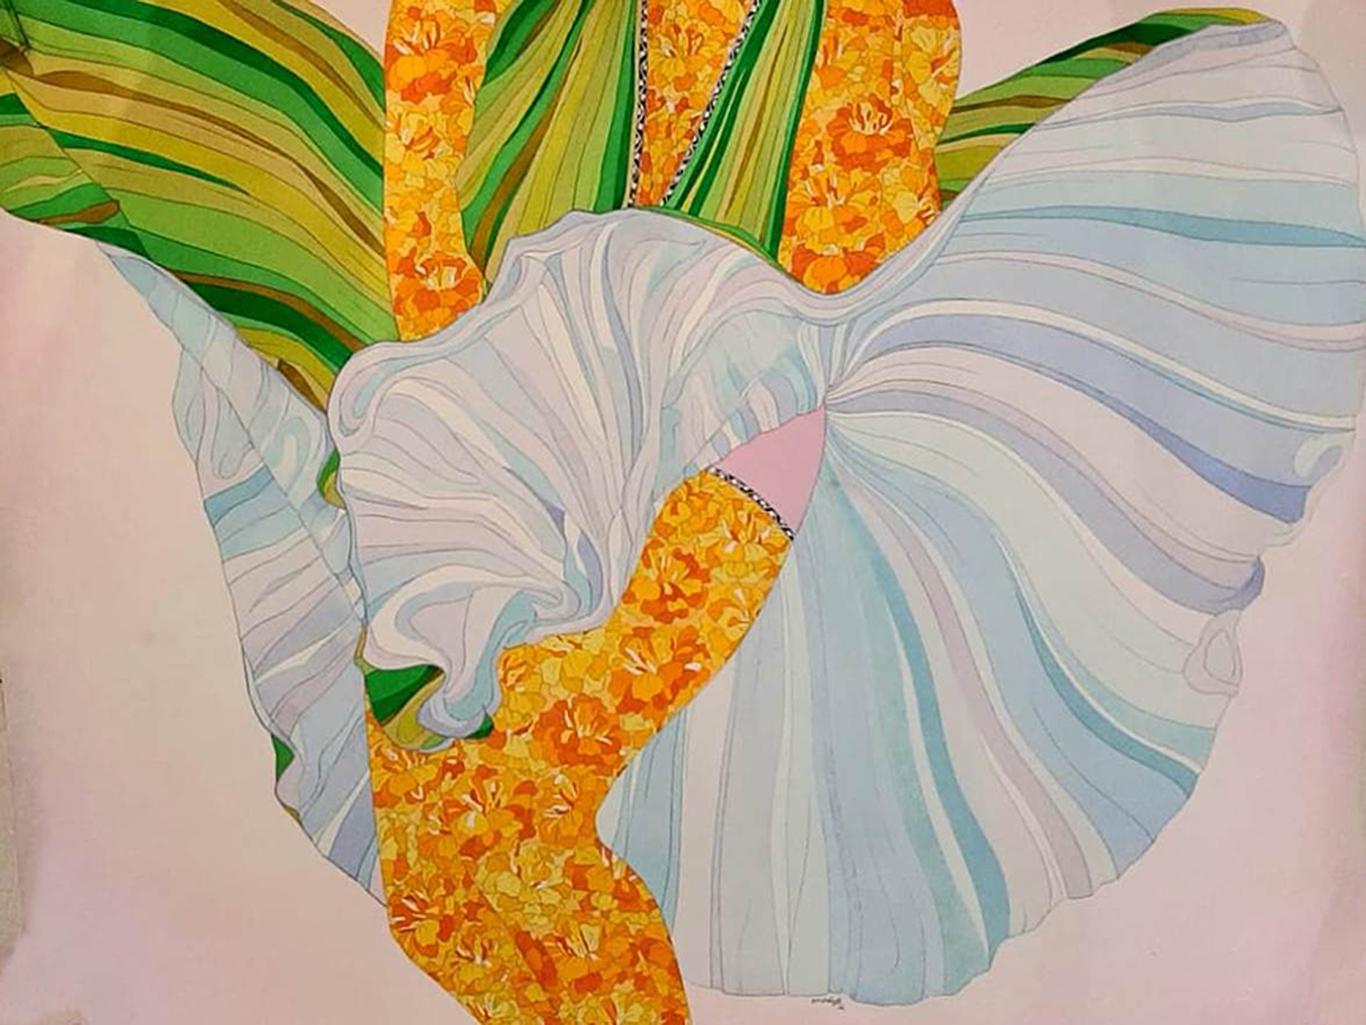 Dileep Sharma Figurative Art - Marigold, Watercolour on Paper, Orange, Green Colour by Indian Artist "In Stock"